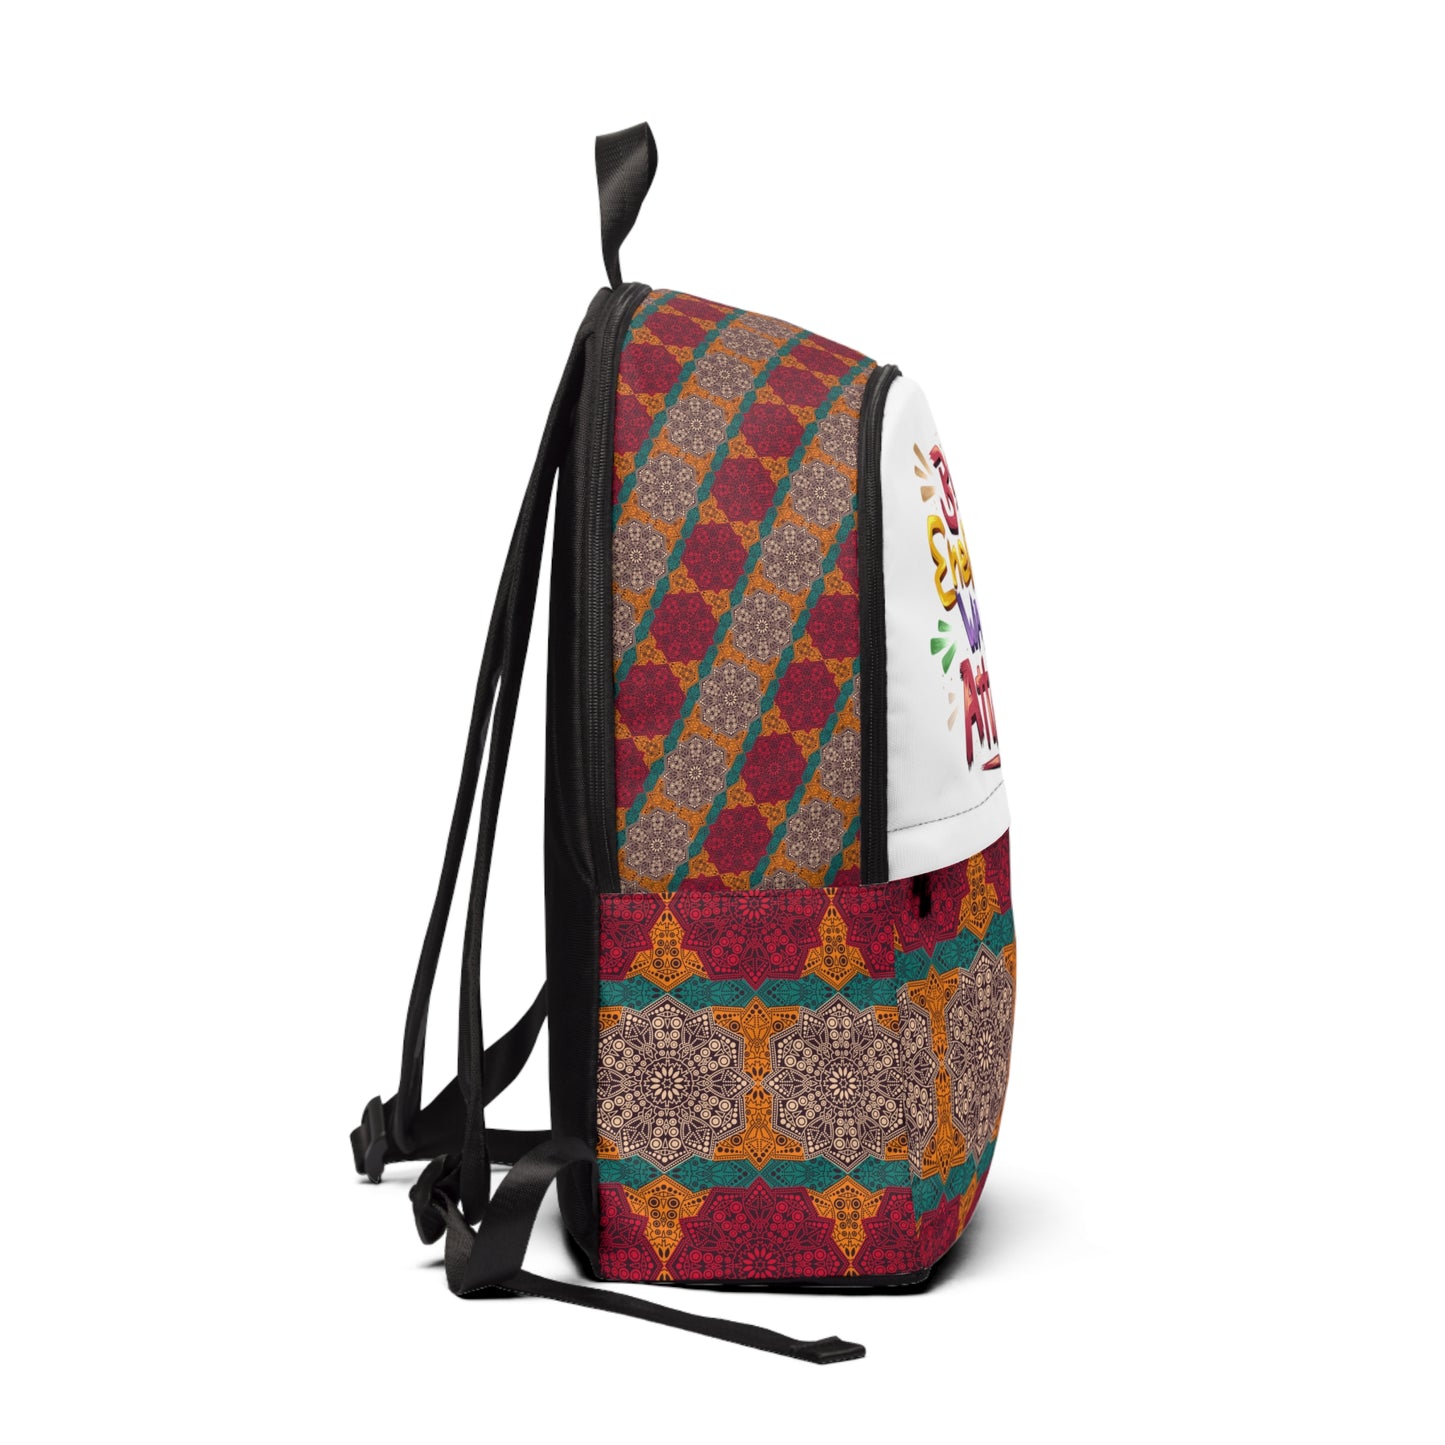 Niccie's Energize Your Style with Unisex Fabric Backpack